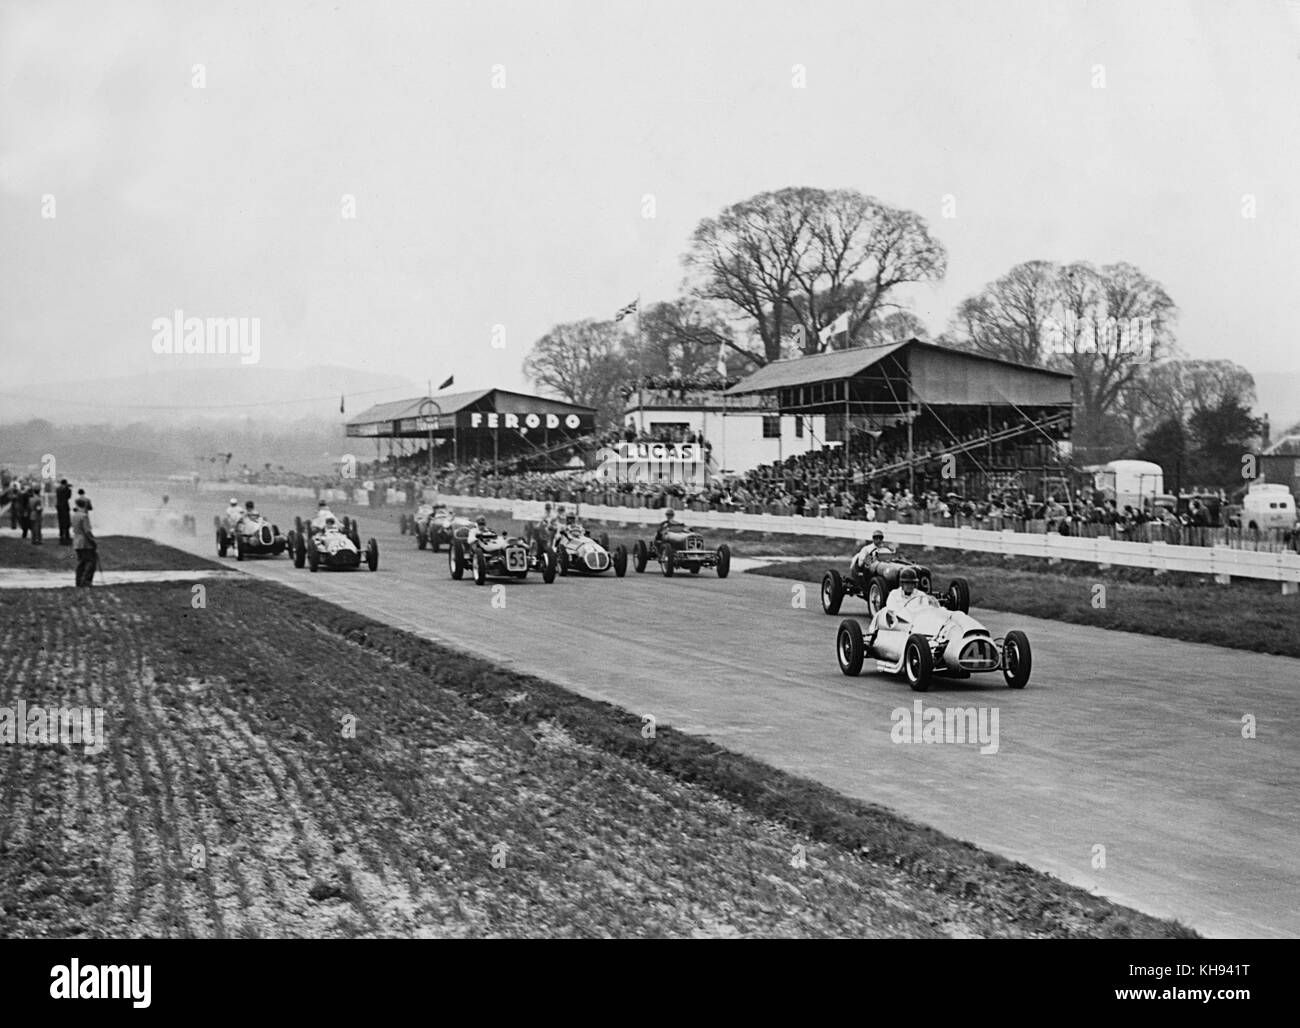 Cooper Bristol of Mike Hawthorn leads at Goodwood Stock Photo